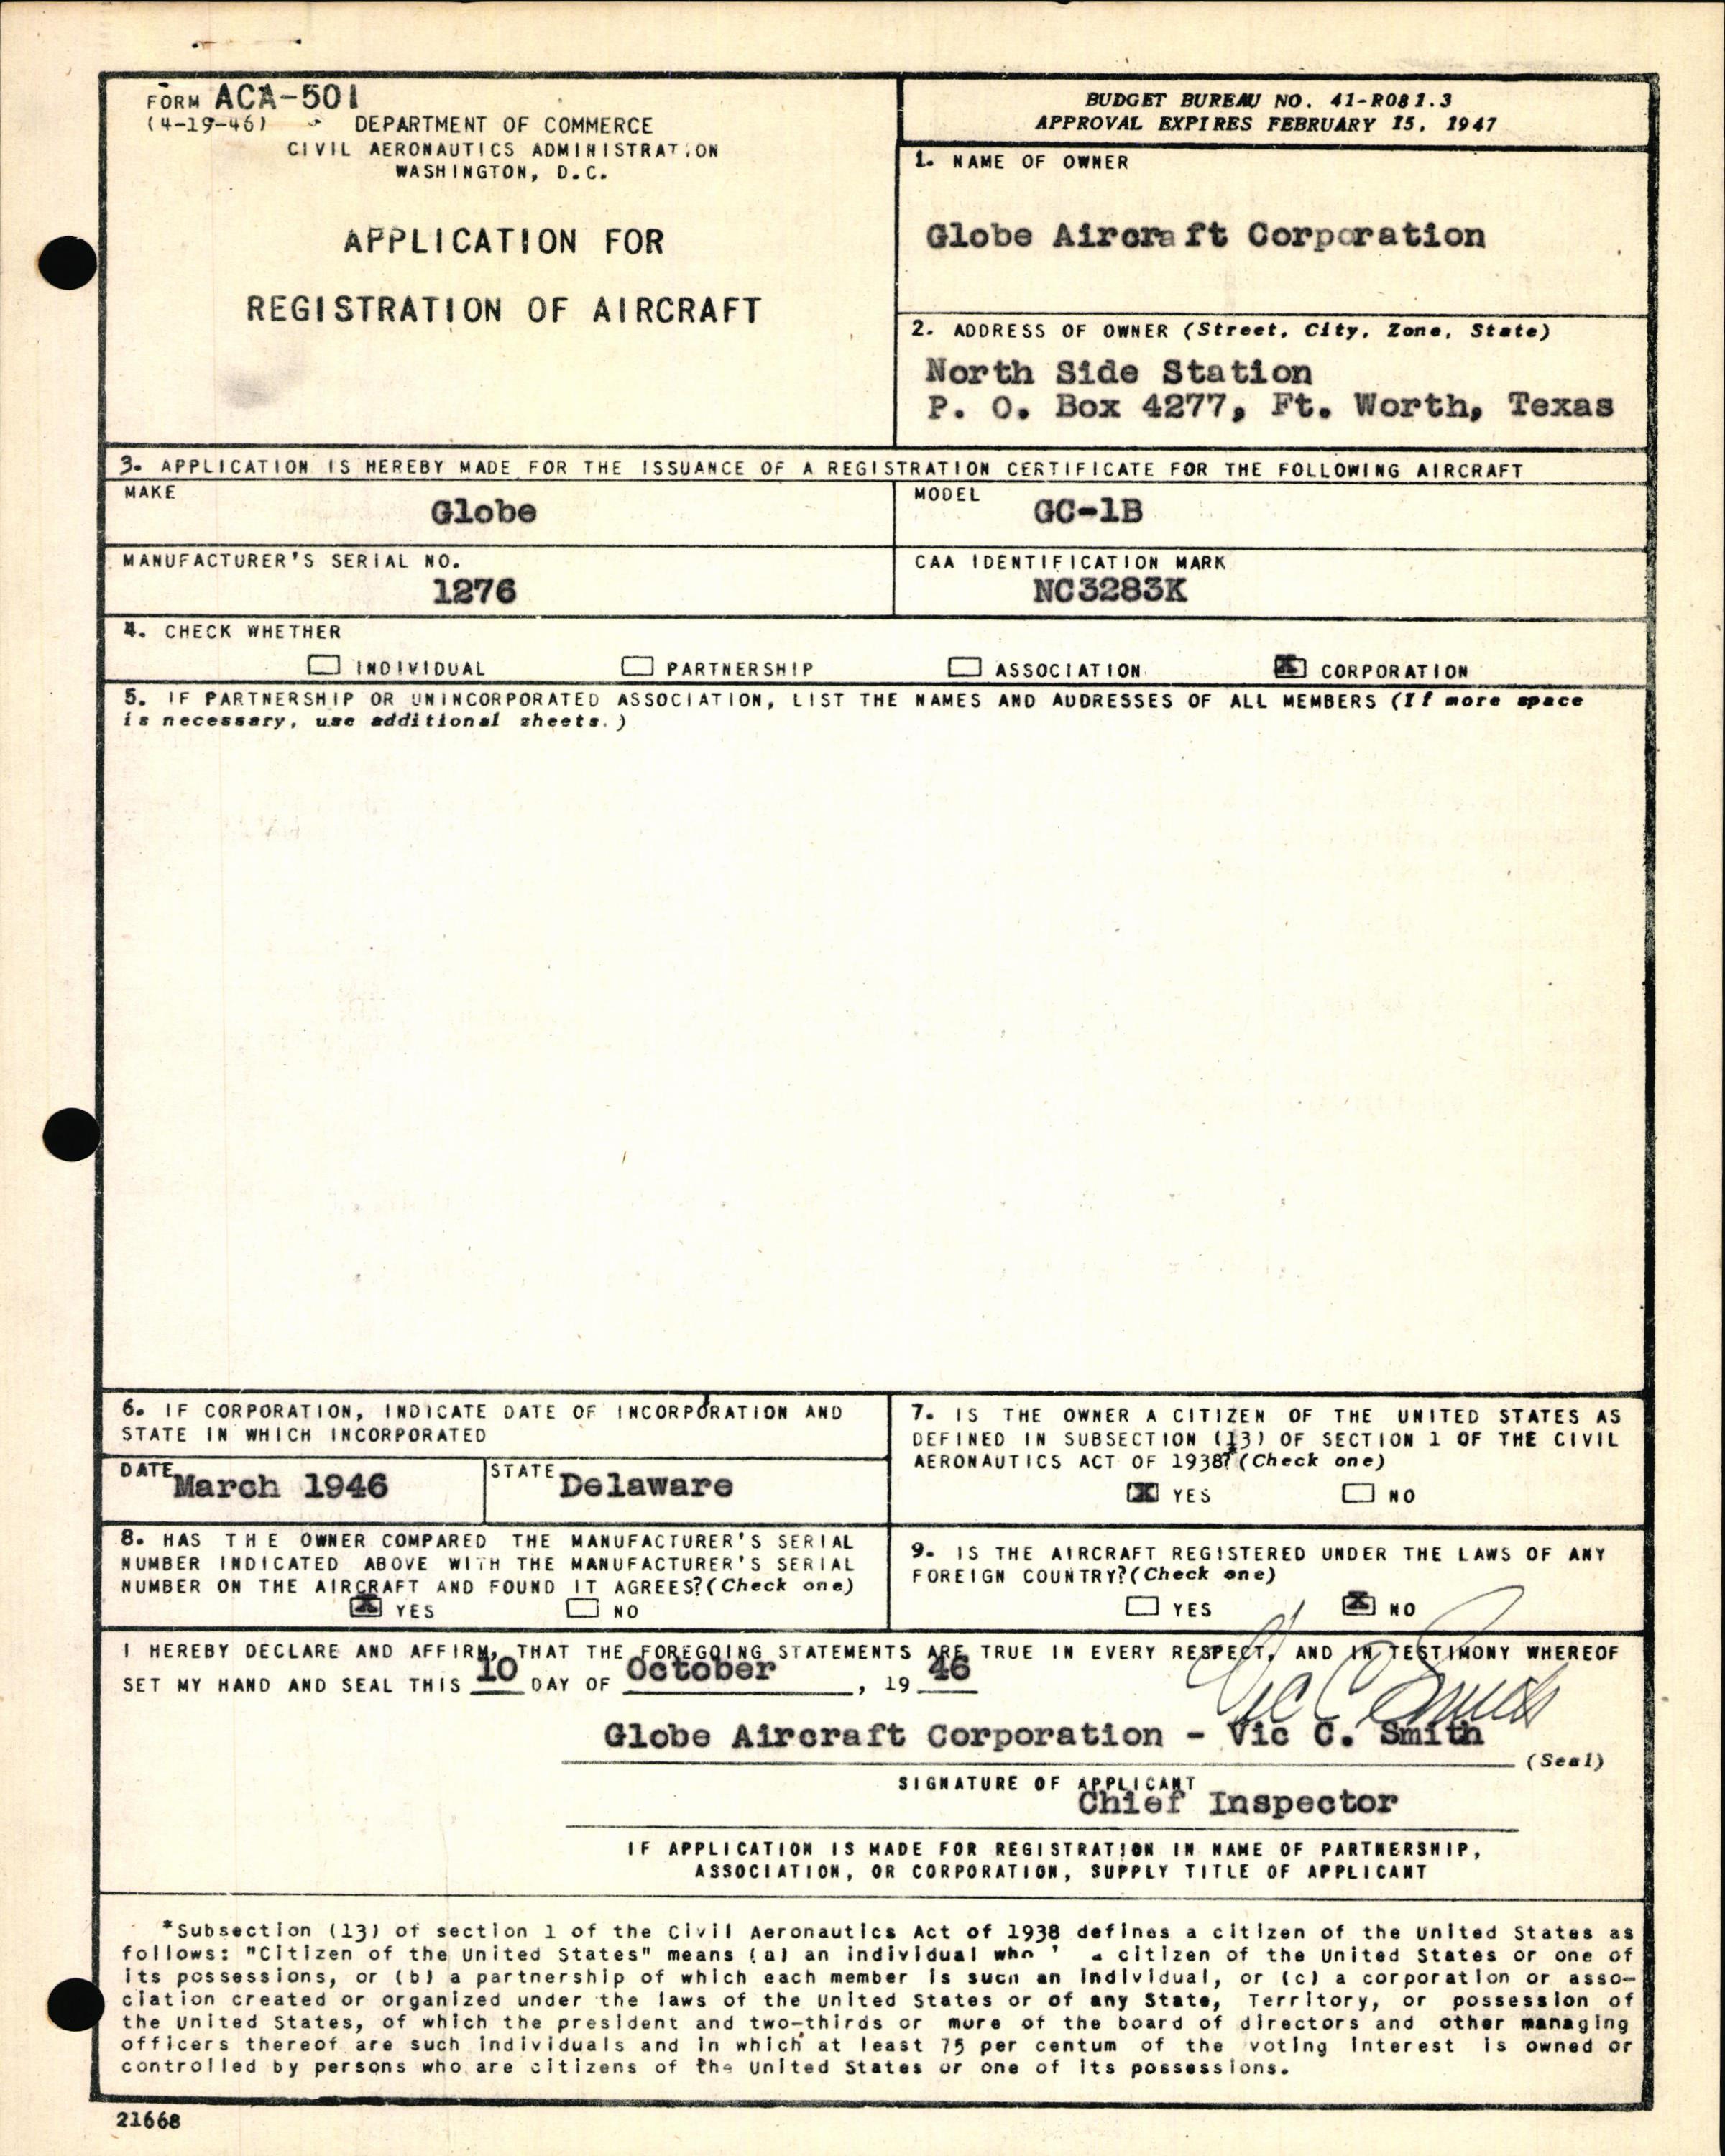 Sample page 5 from AirCorps Library document: Technical Information for Serial Number 1276